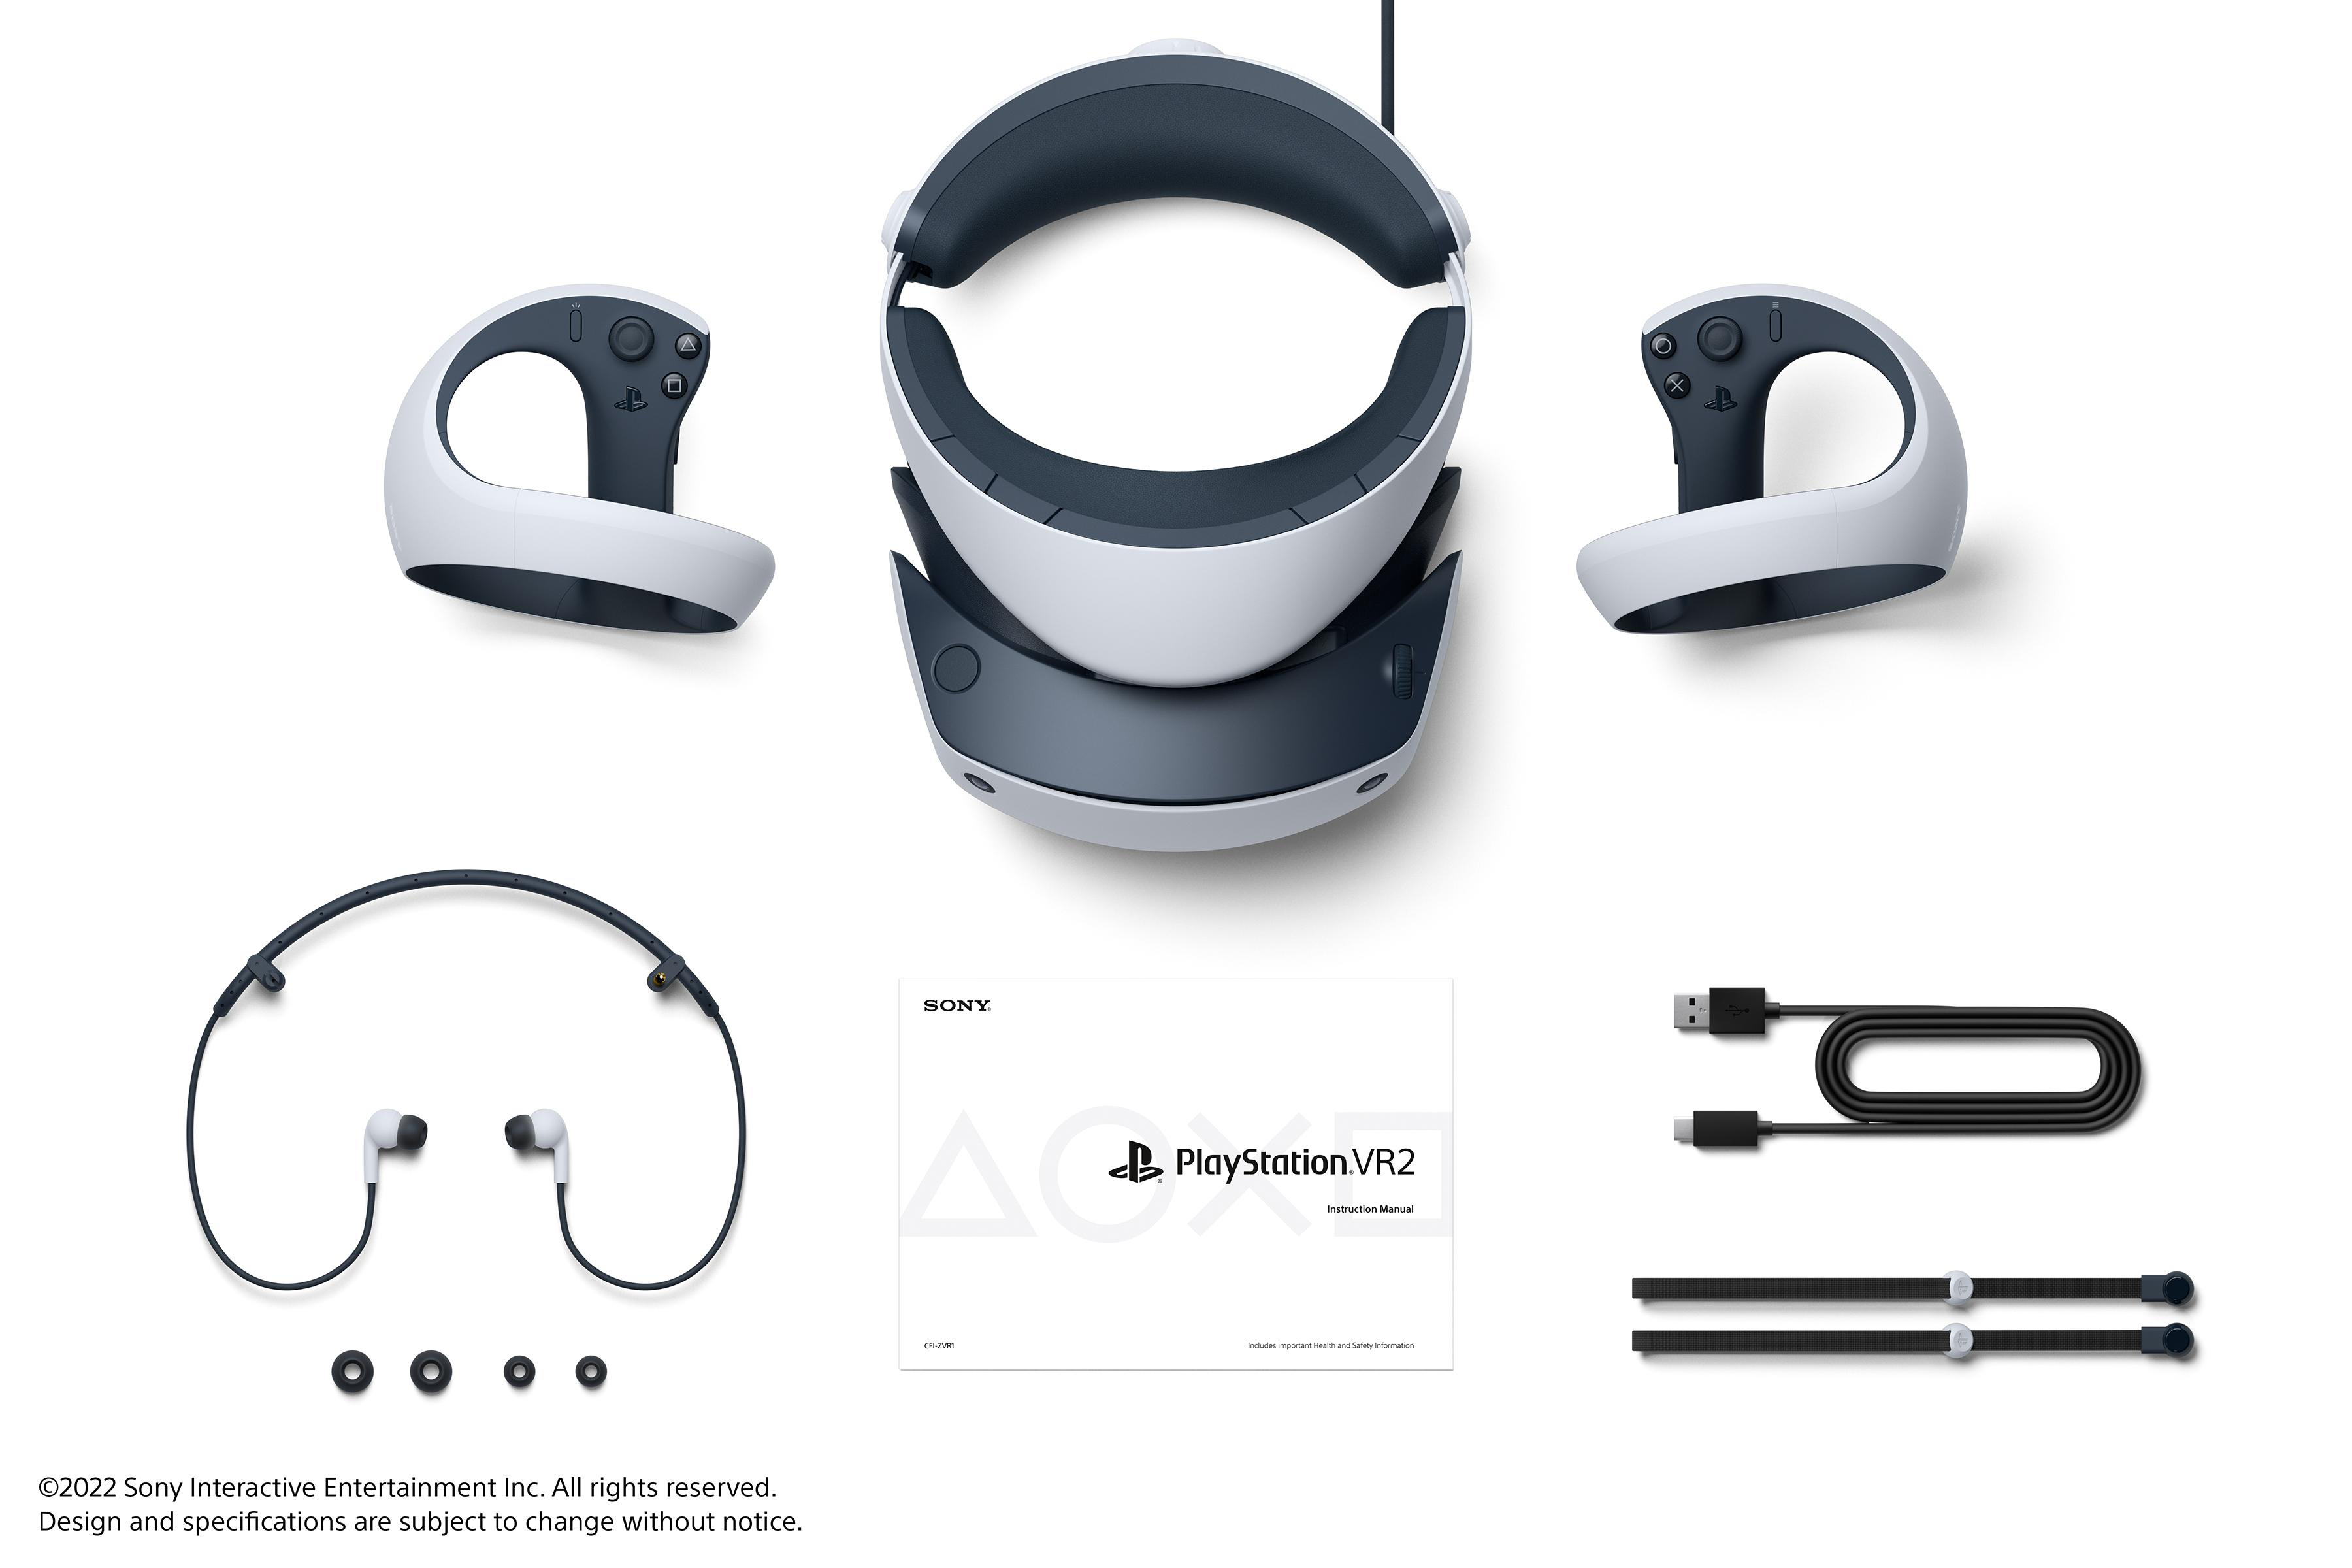 SONY PS VR2 OF CALL System MOUNTAIN HORIZON THE VR